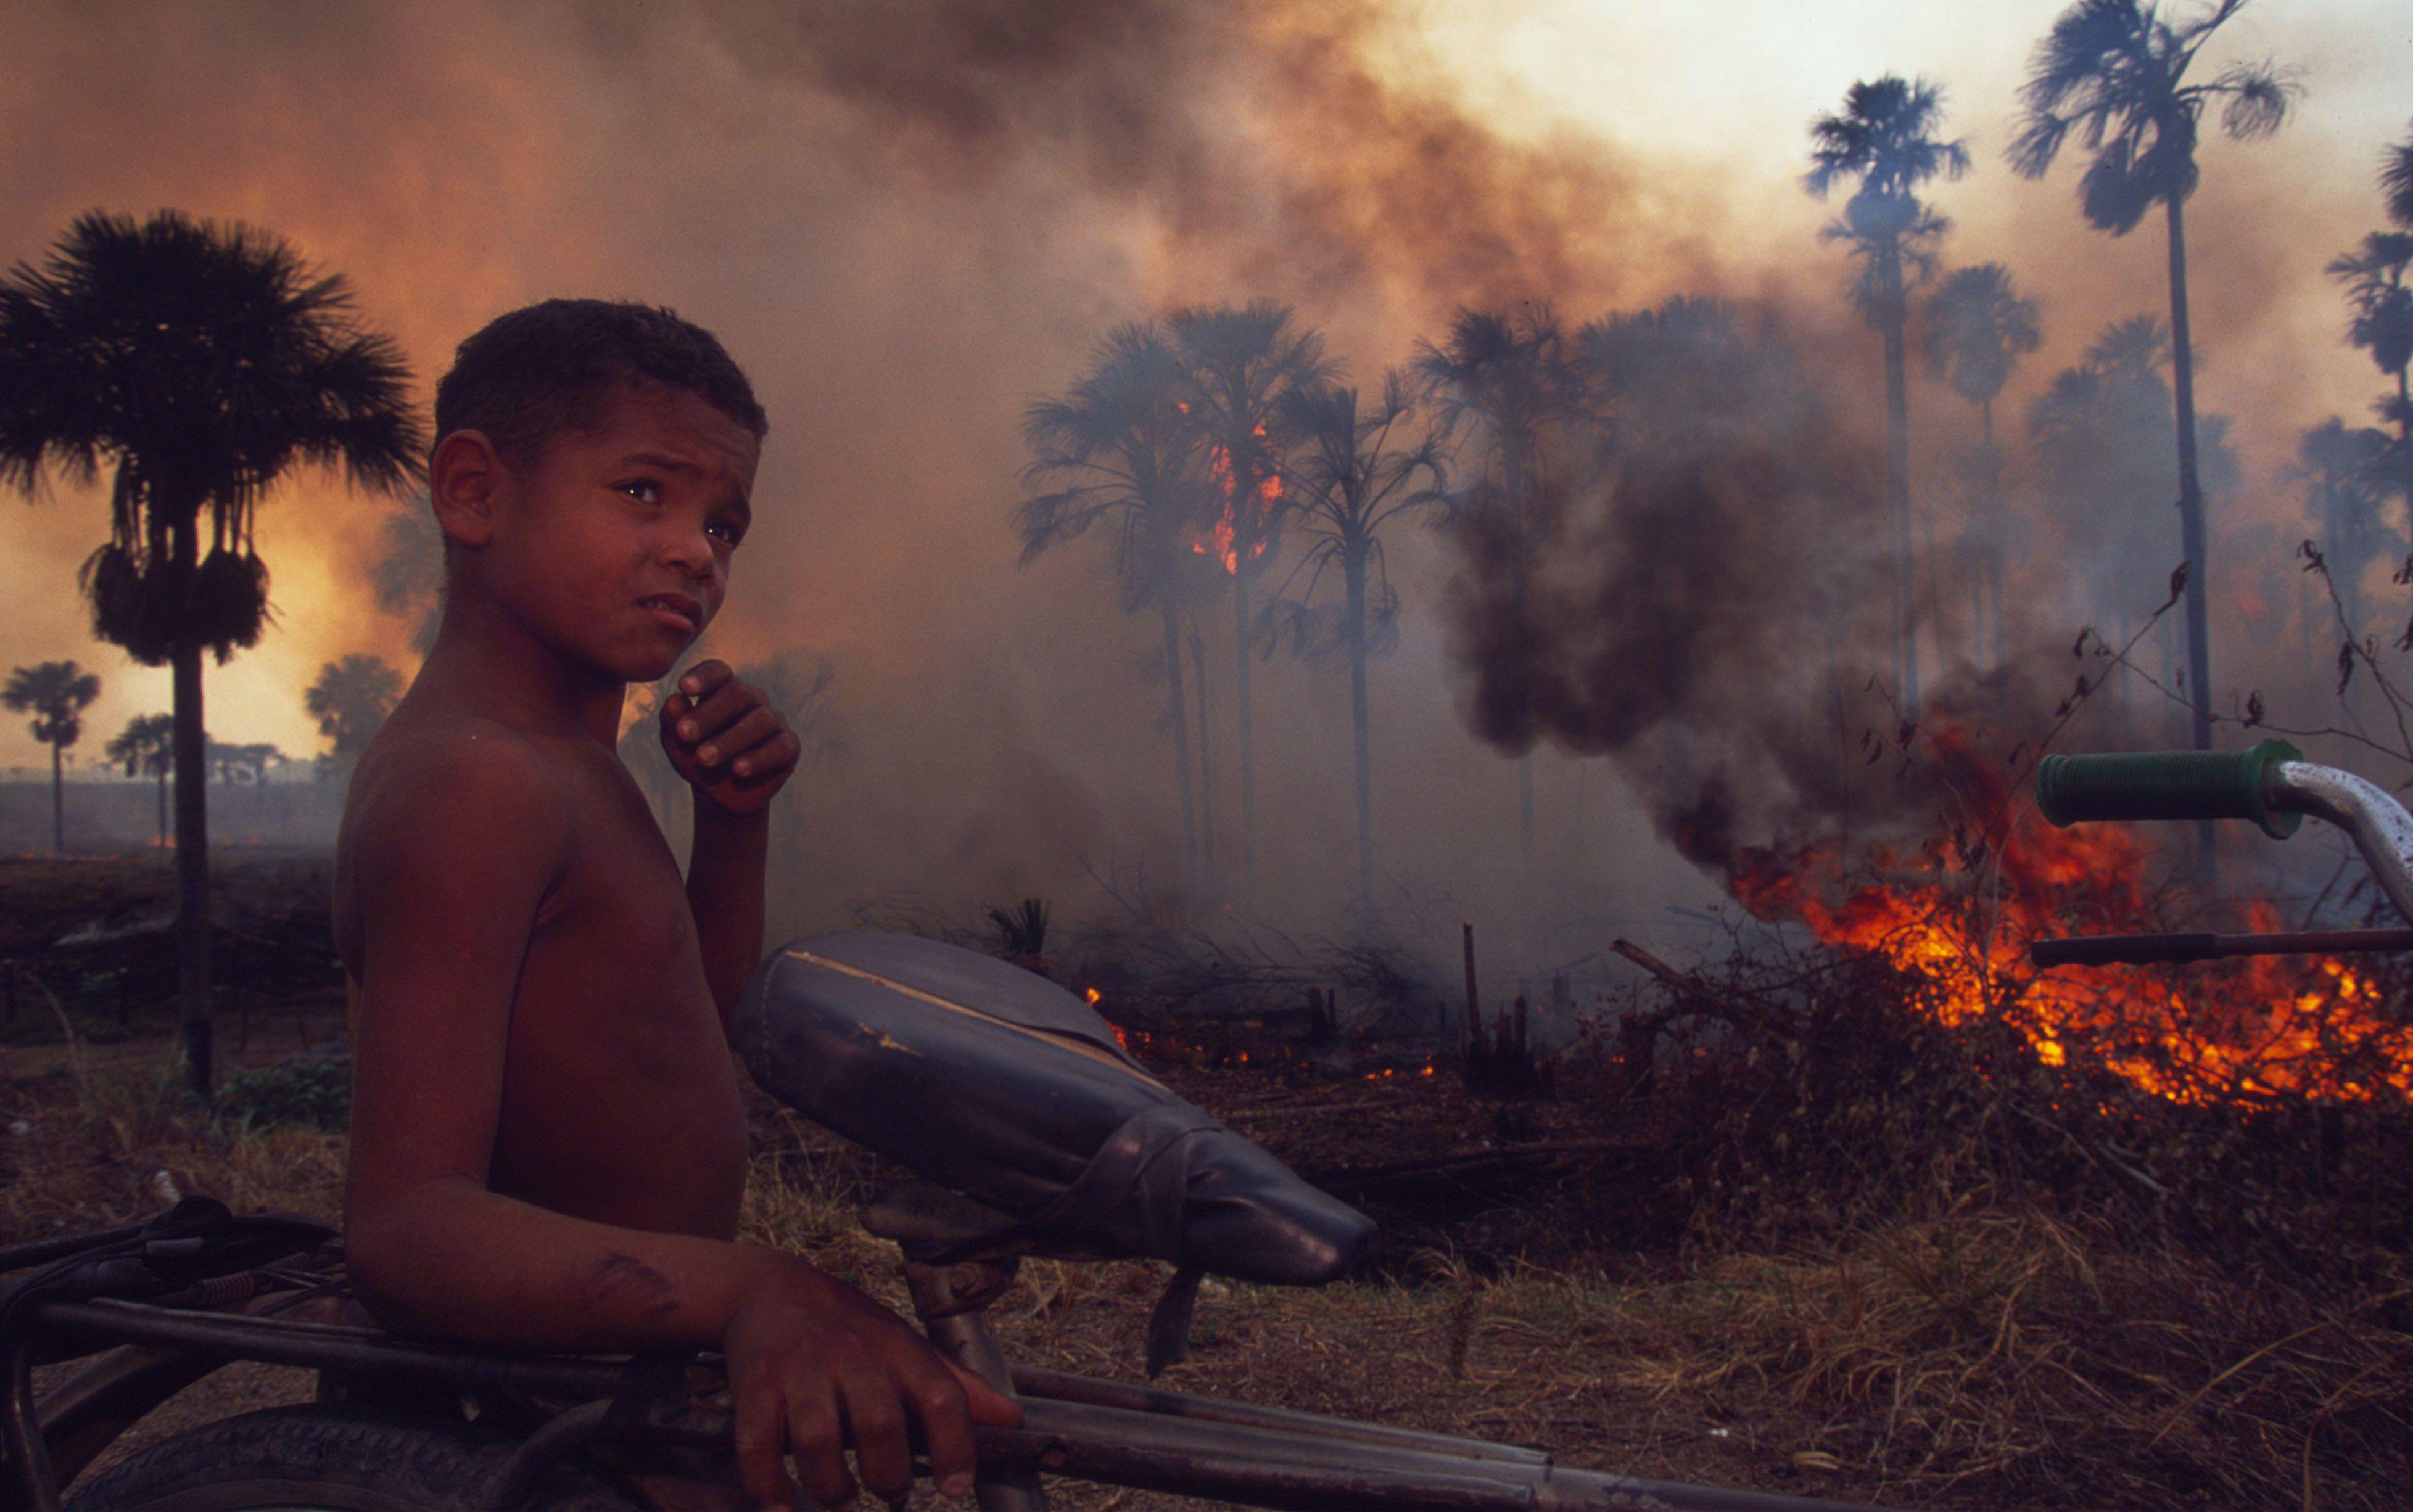 Young boy on the road along burning forest Roraima state Amazon. Brazil